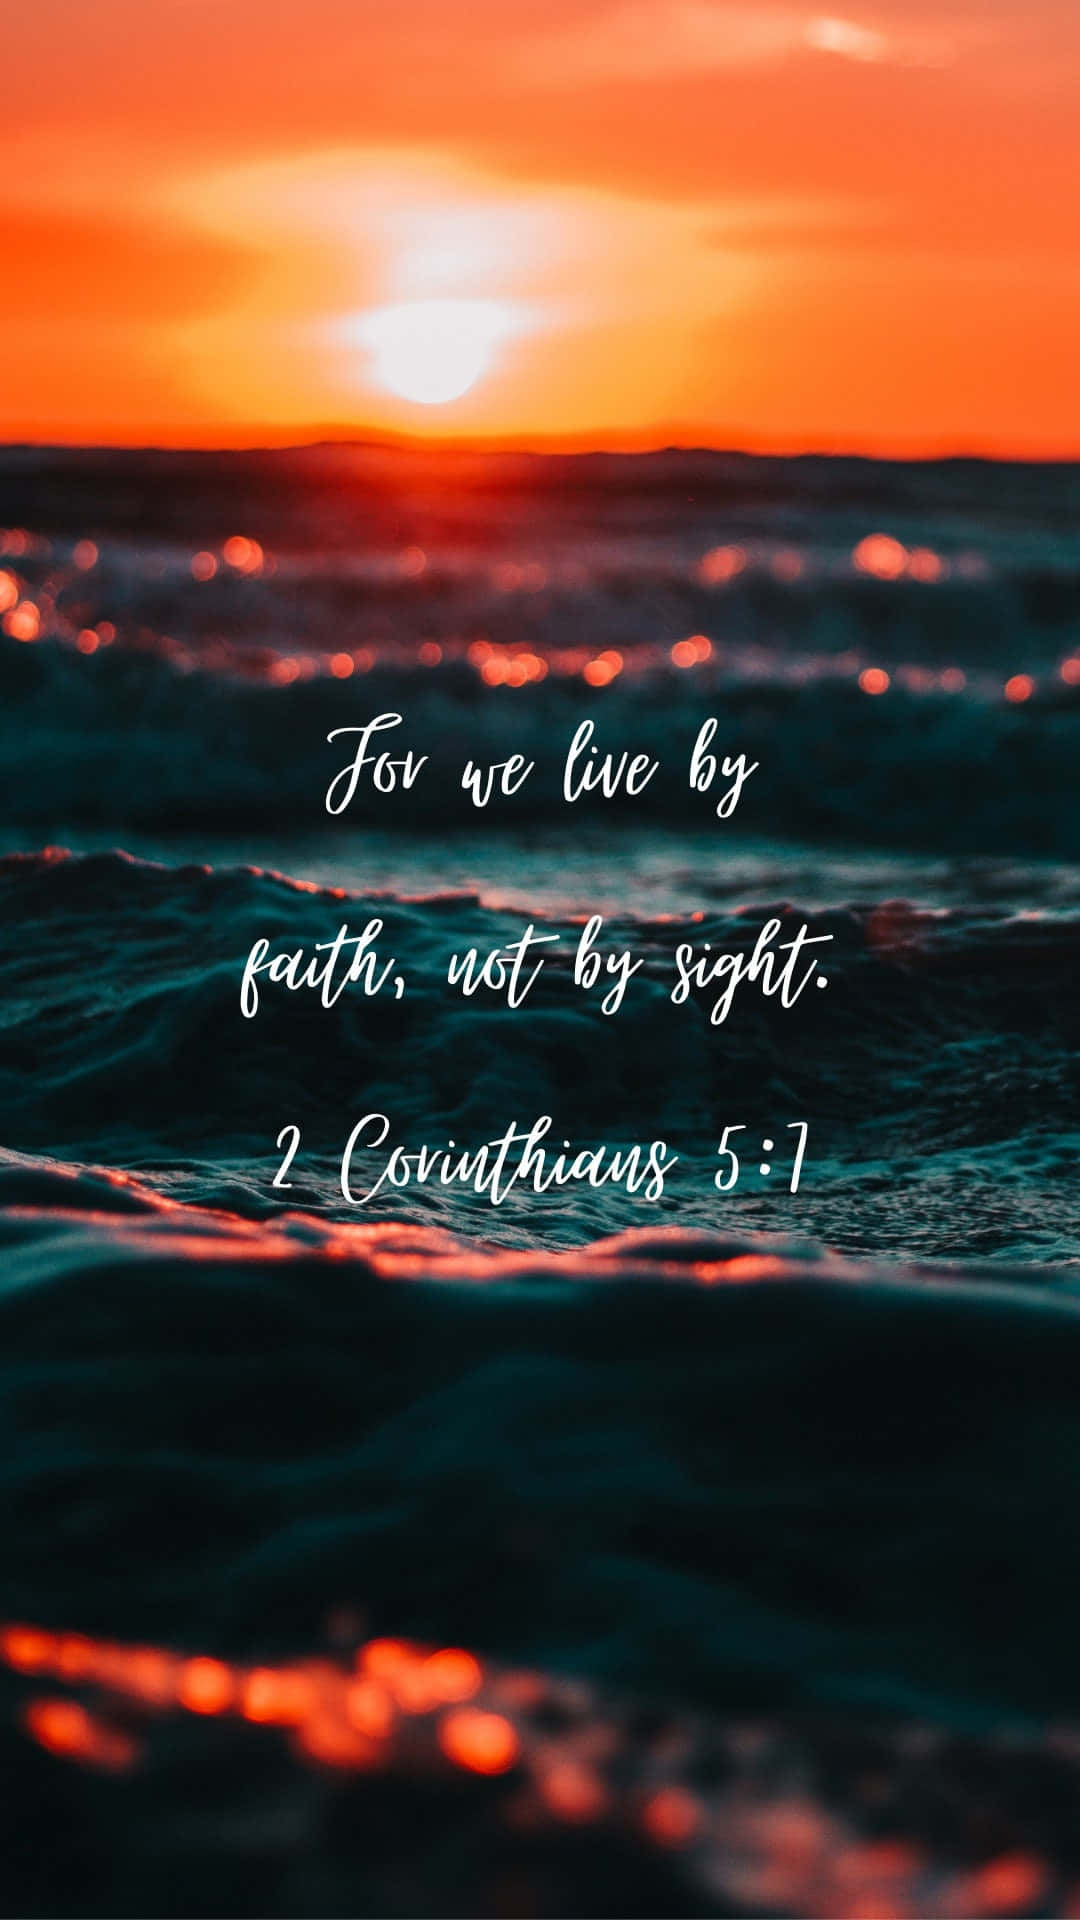 HD Scripture Android Mobile Wallpapers - Wallpaper Cave